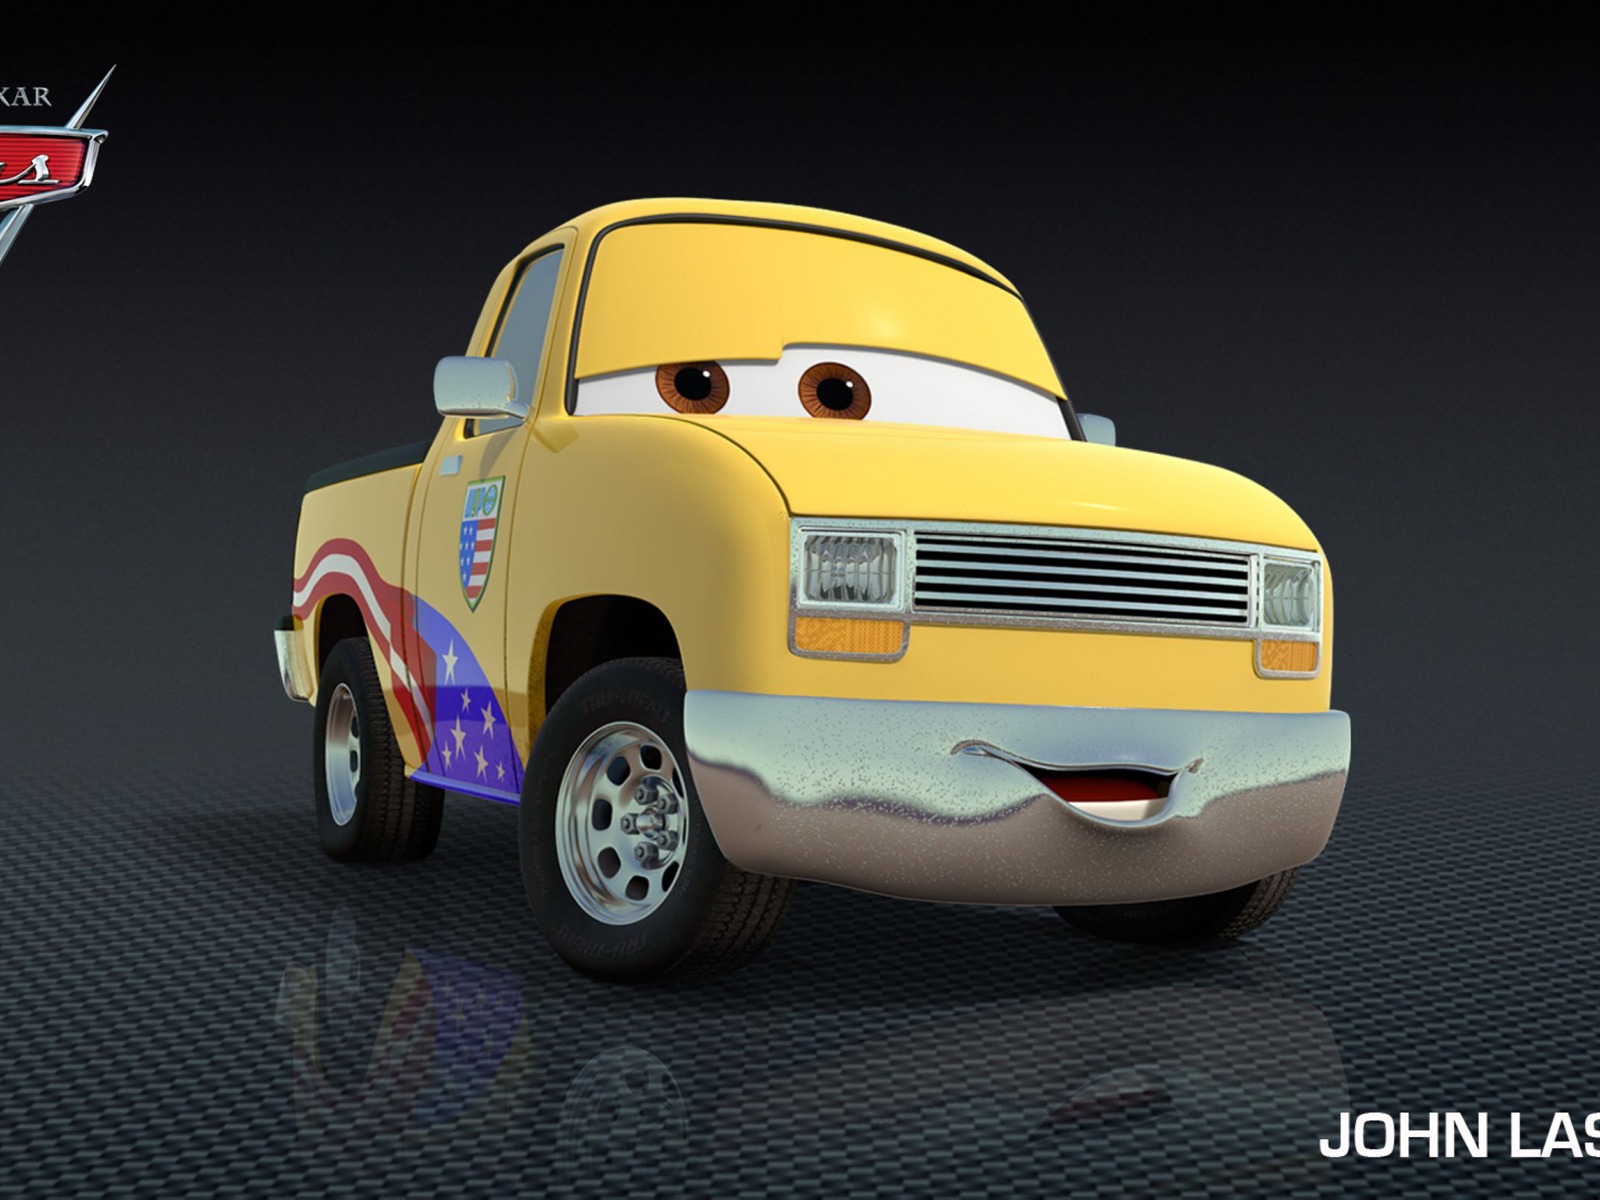 Cars 2 wallpapers #30 - 1600x1200